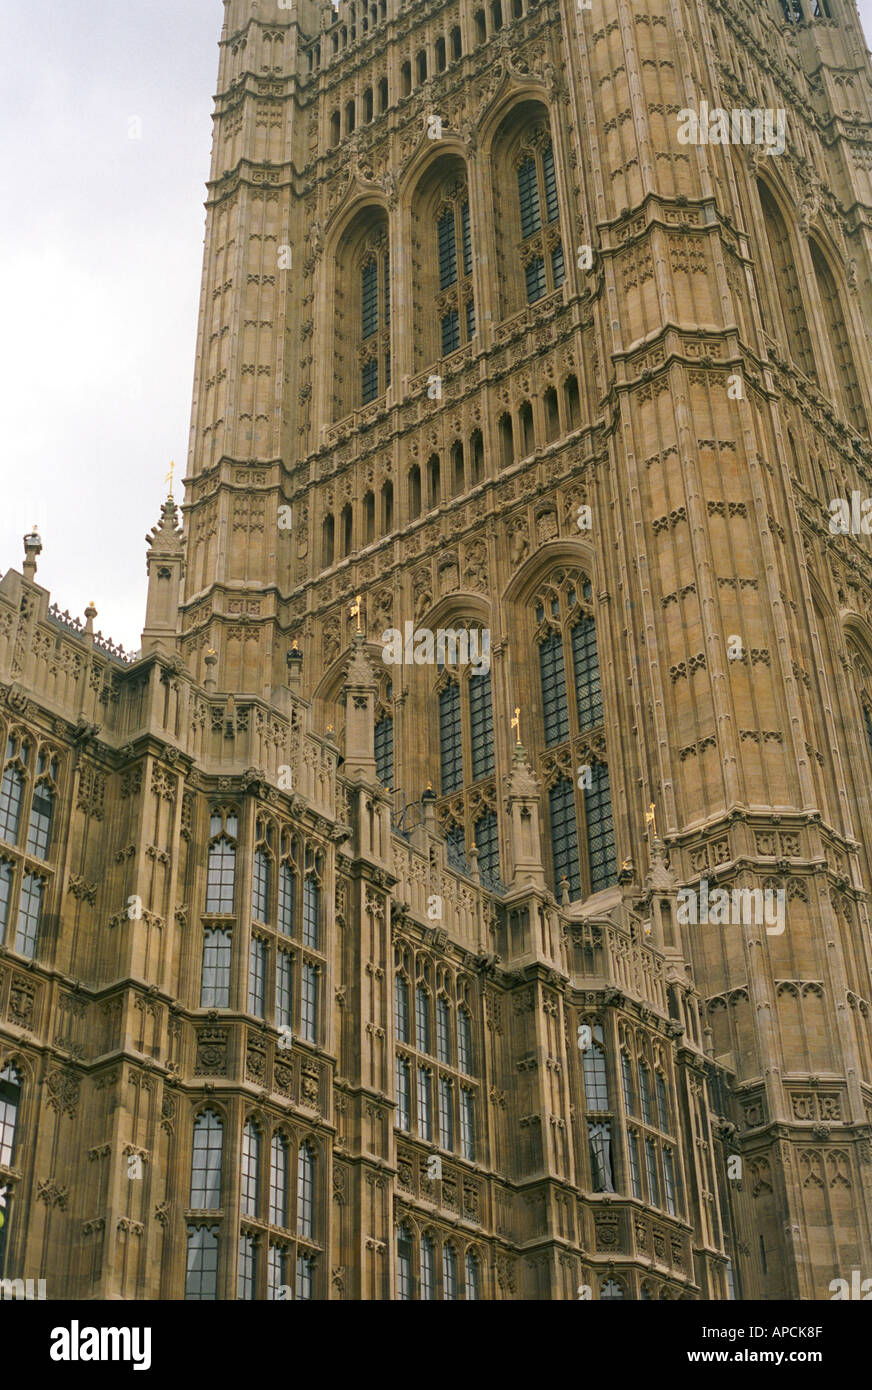 architectural detail at the houses of parliament in westminster london Stock Photo